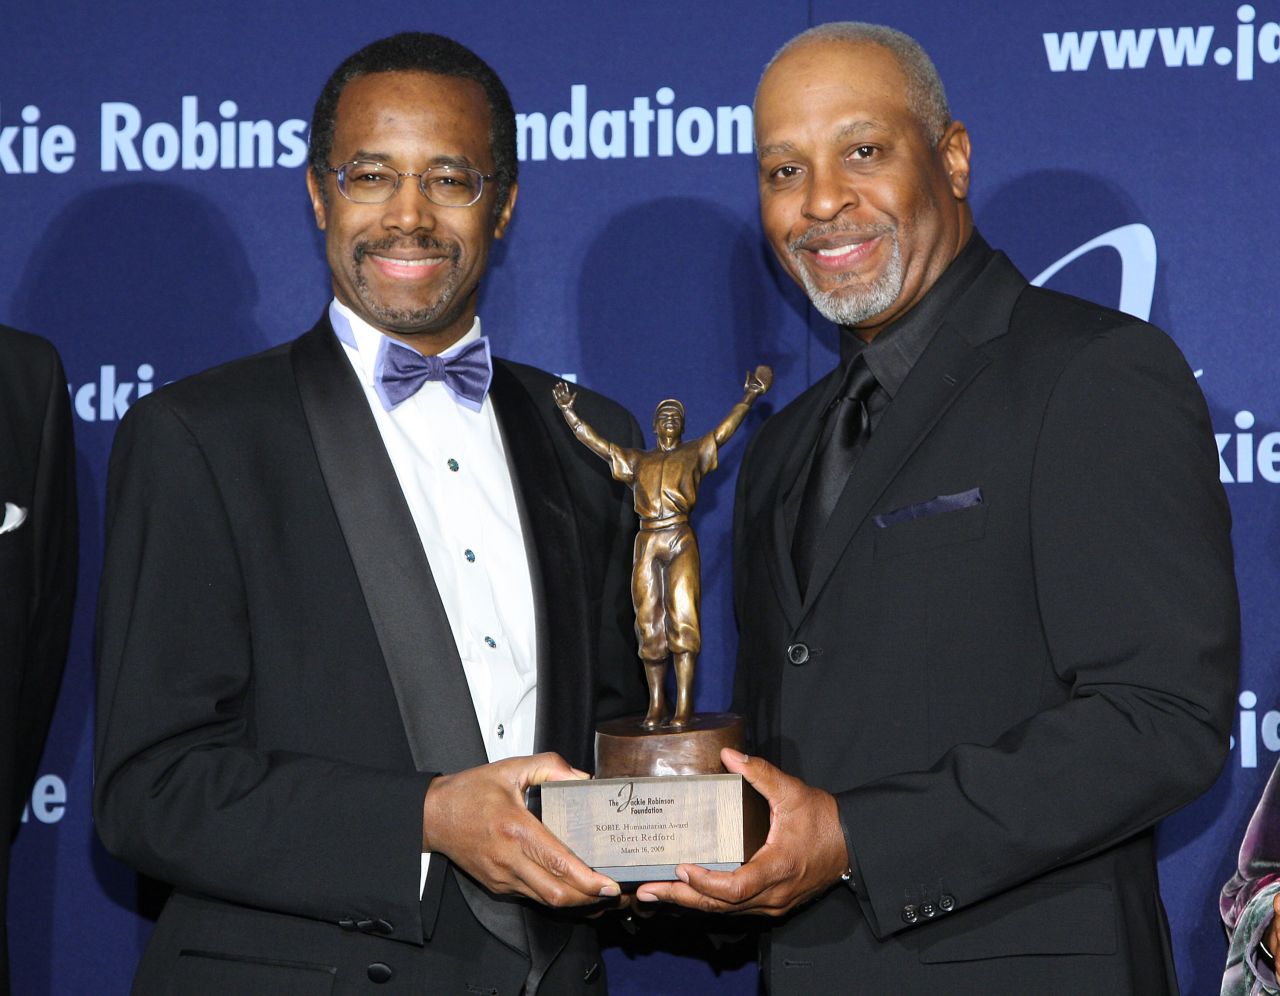 Honoree and director of pediatric neurosurgery at Johns Hopkins University, Carson poses with actor James Pickens Jr. at the Jackie Robinson Foundation Annual Awards Dinner on March 16, 2009, in New York City. 